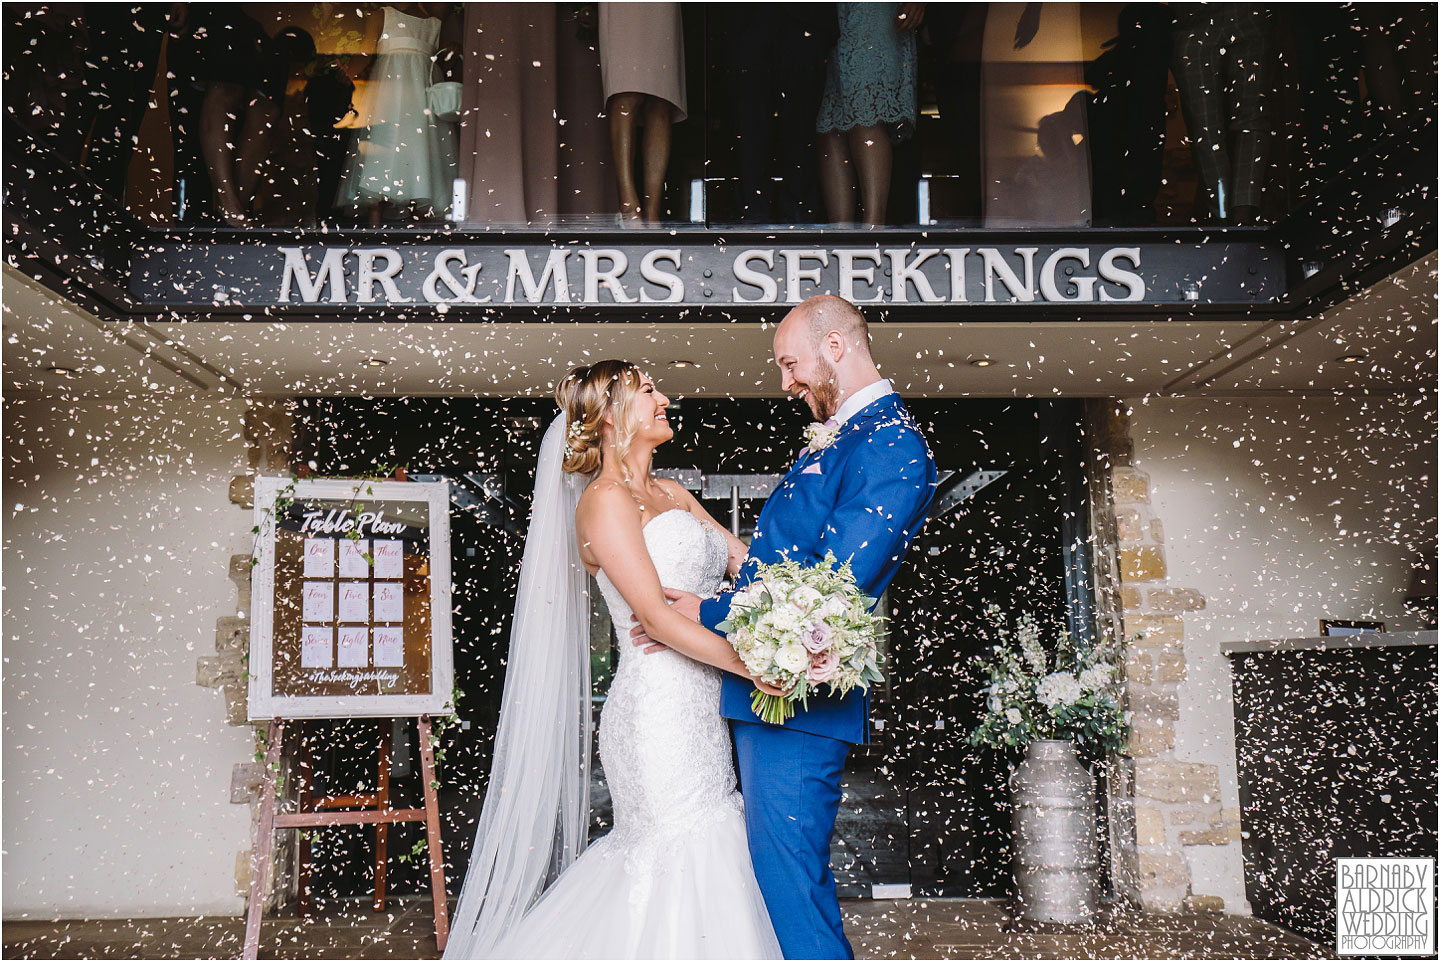 Confetti photograph at Priory Cottages Wedding Barn in Syningthwaite Priory, Wedding photography at St Peter's Church Walton near Wetherby, Priory Cottages Barn Wedding Venue Photos, Yorkshire Barn Venue Photos